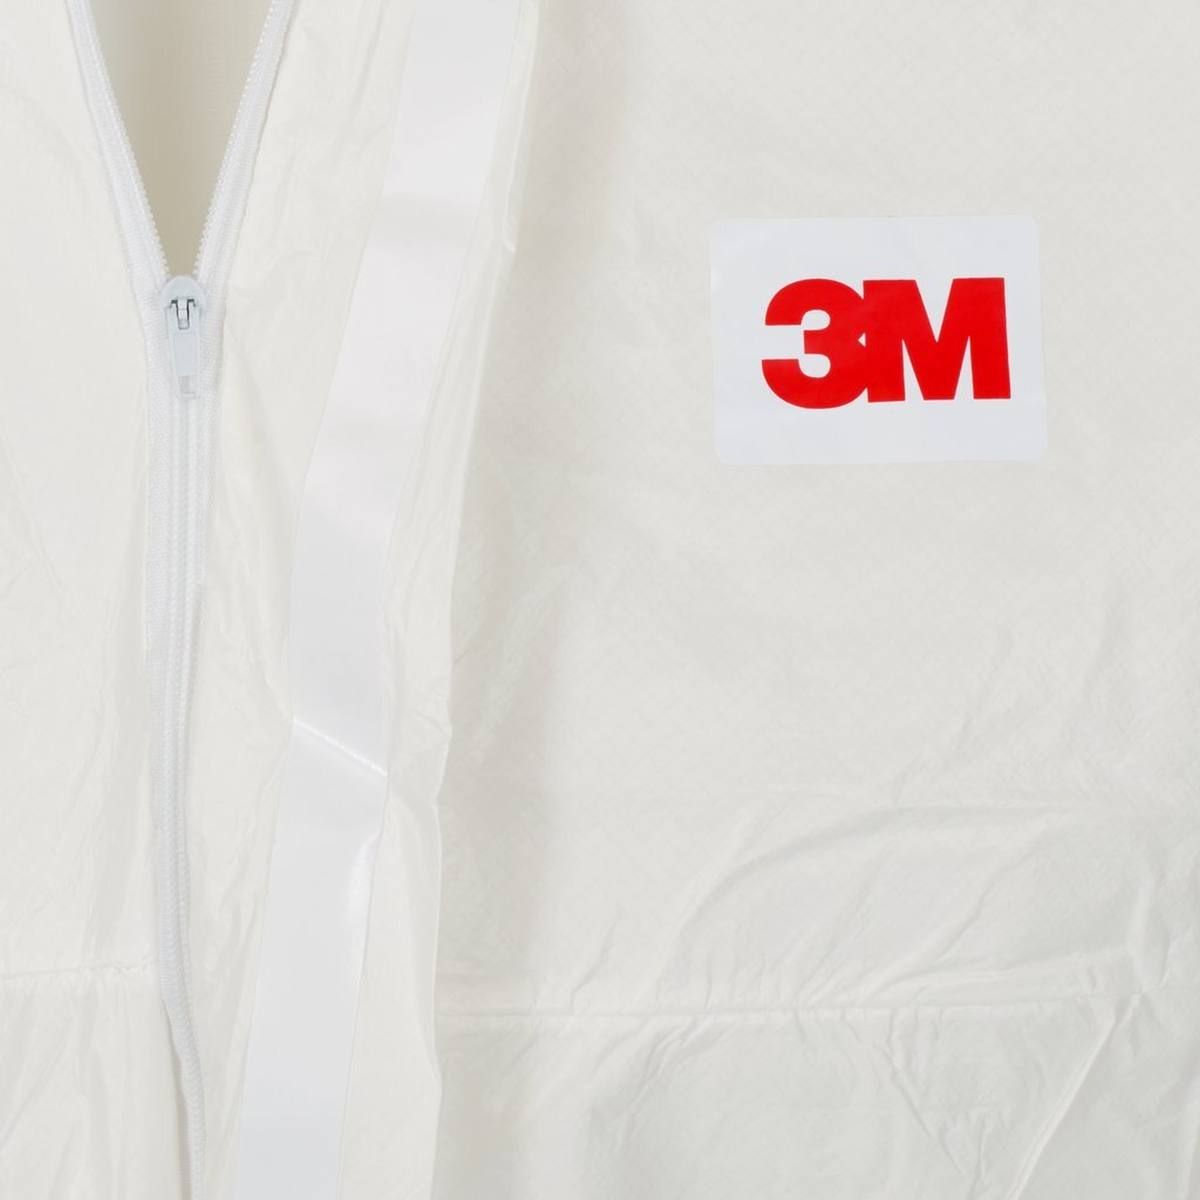 3M 4540 coverall, white blue, type 5/6, size 3XL, robust, lint-free, reinforced seams, SMMMS material, breathable, detachable zipper, knitted cuffs